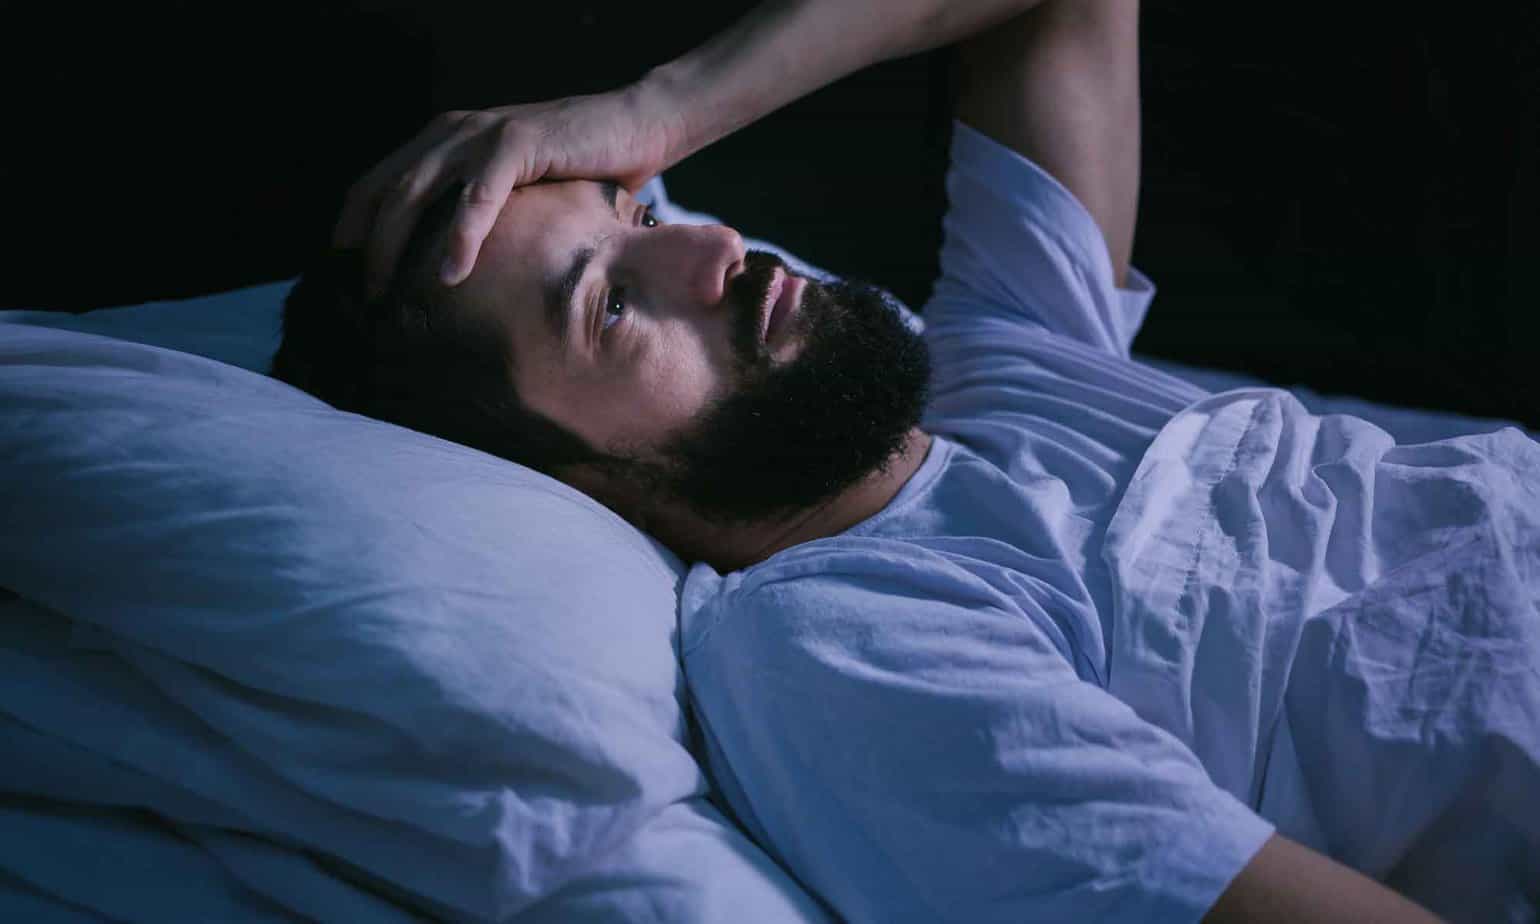 man lying awake in bed after dreaming about relapsing